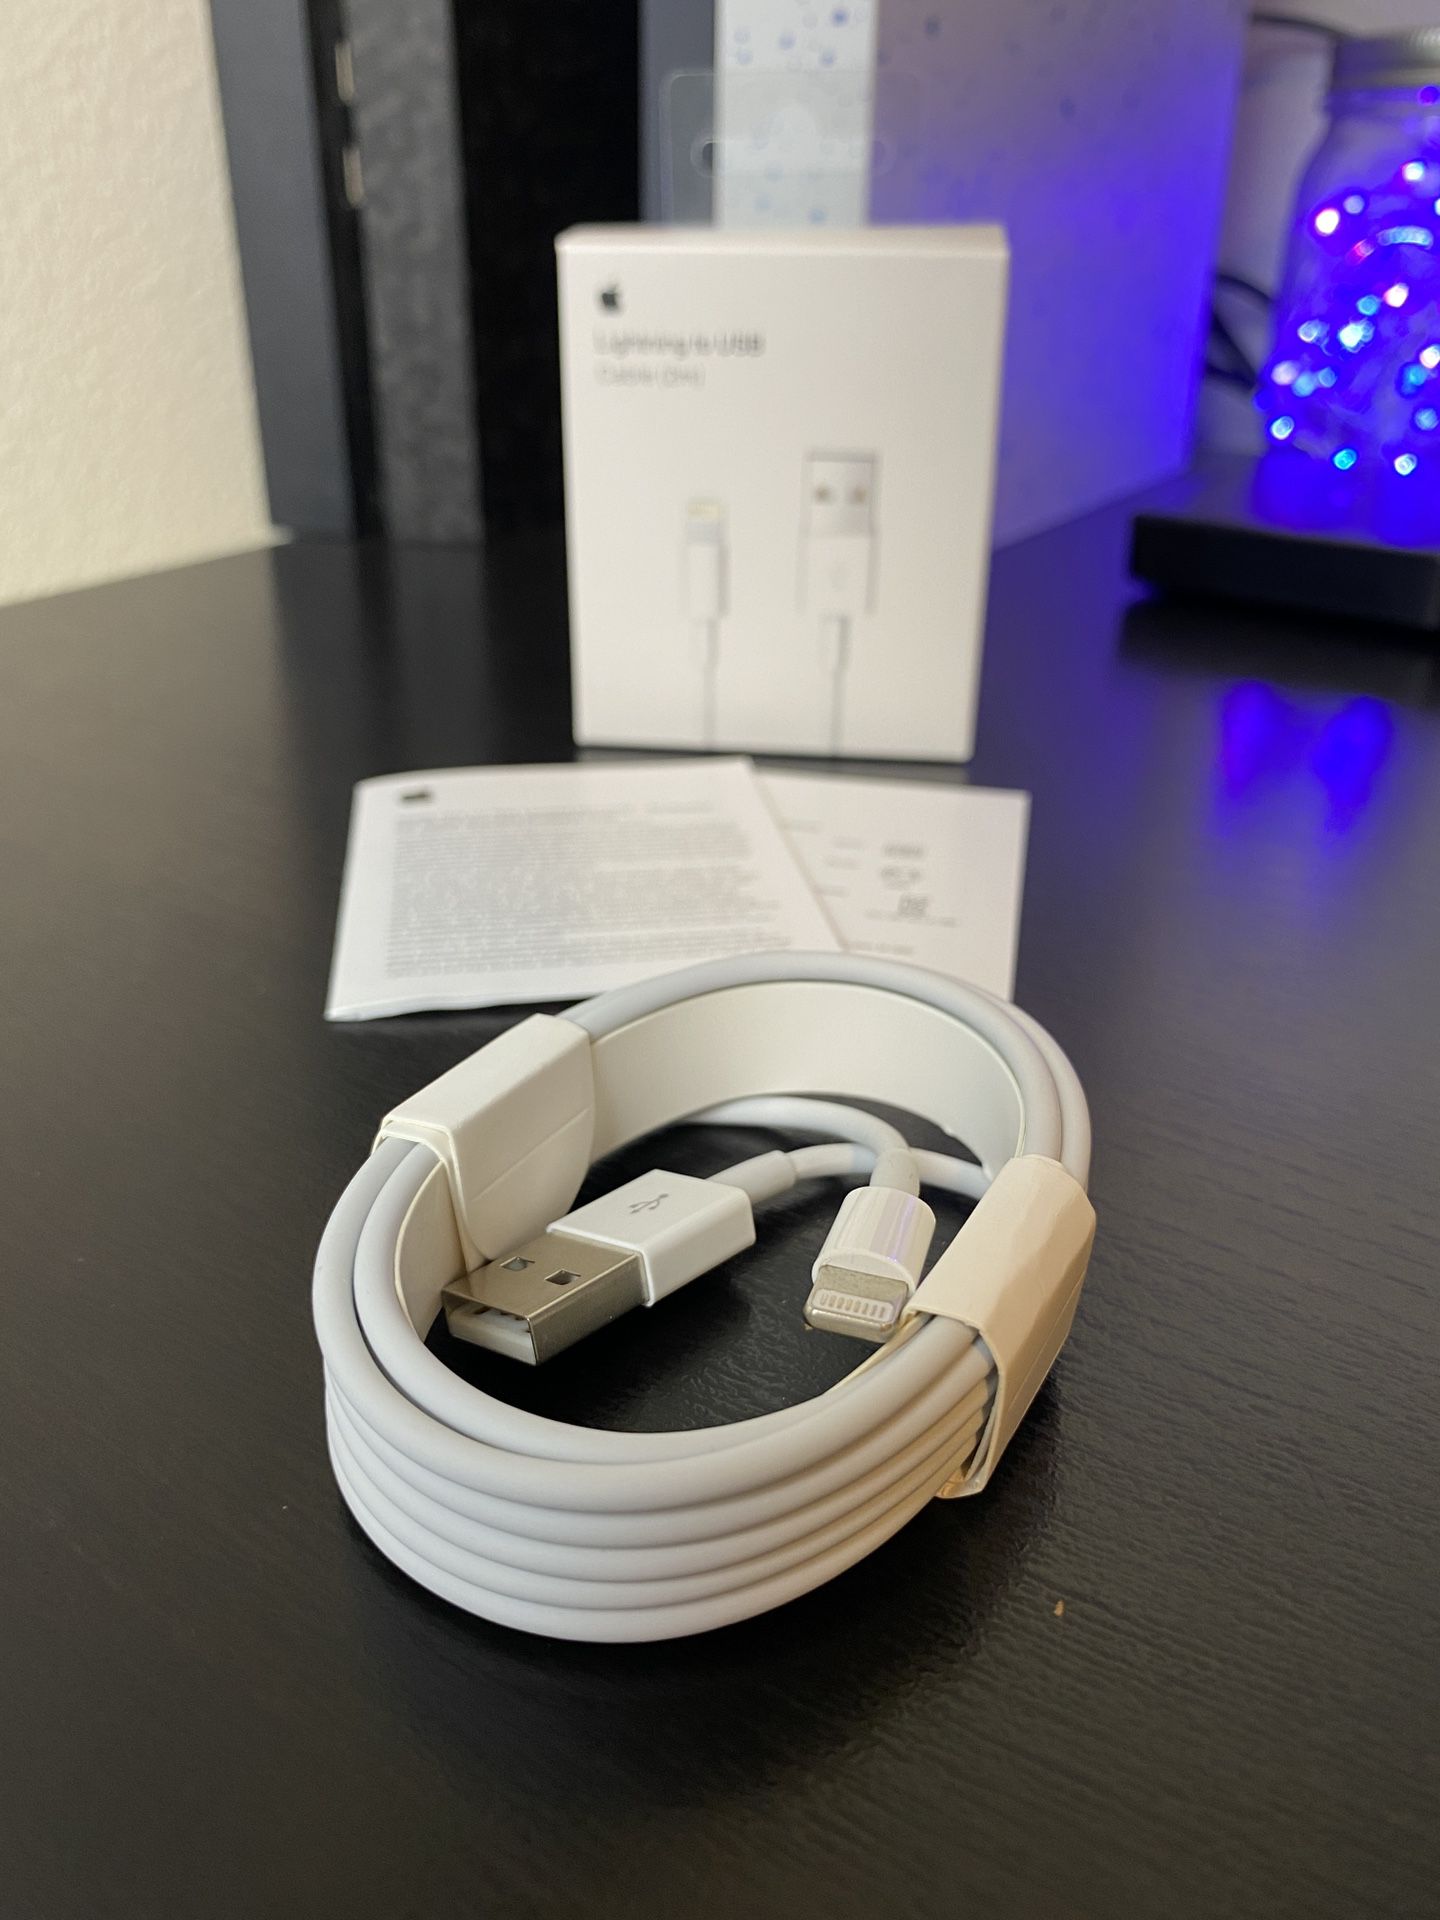 New Lightning Charging Cable (For iPod / iPhone / iPad / Airpods / Exc..)